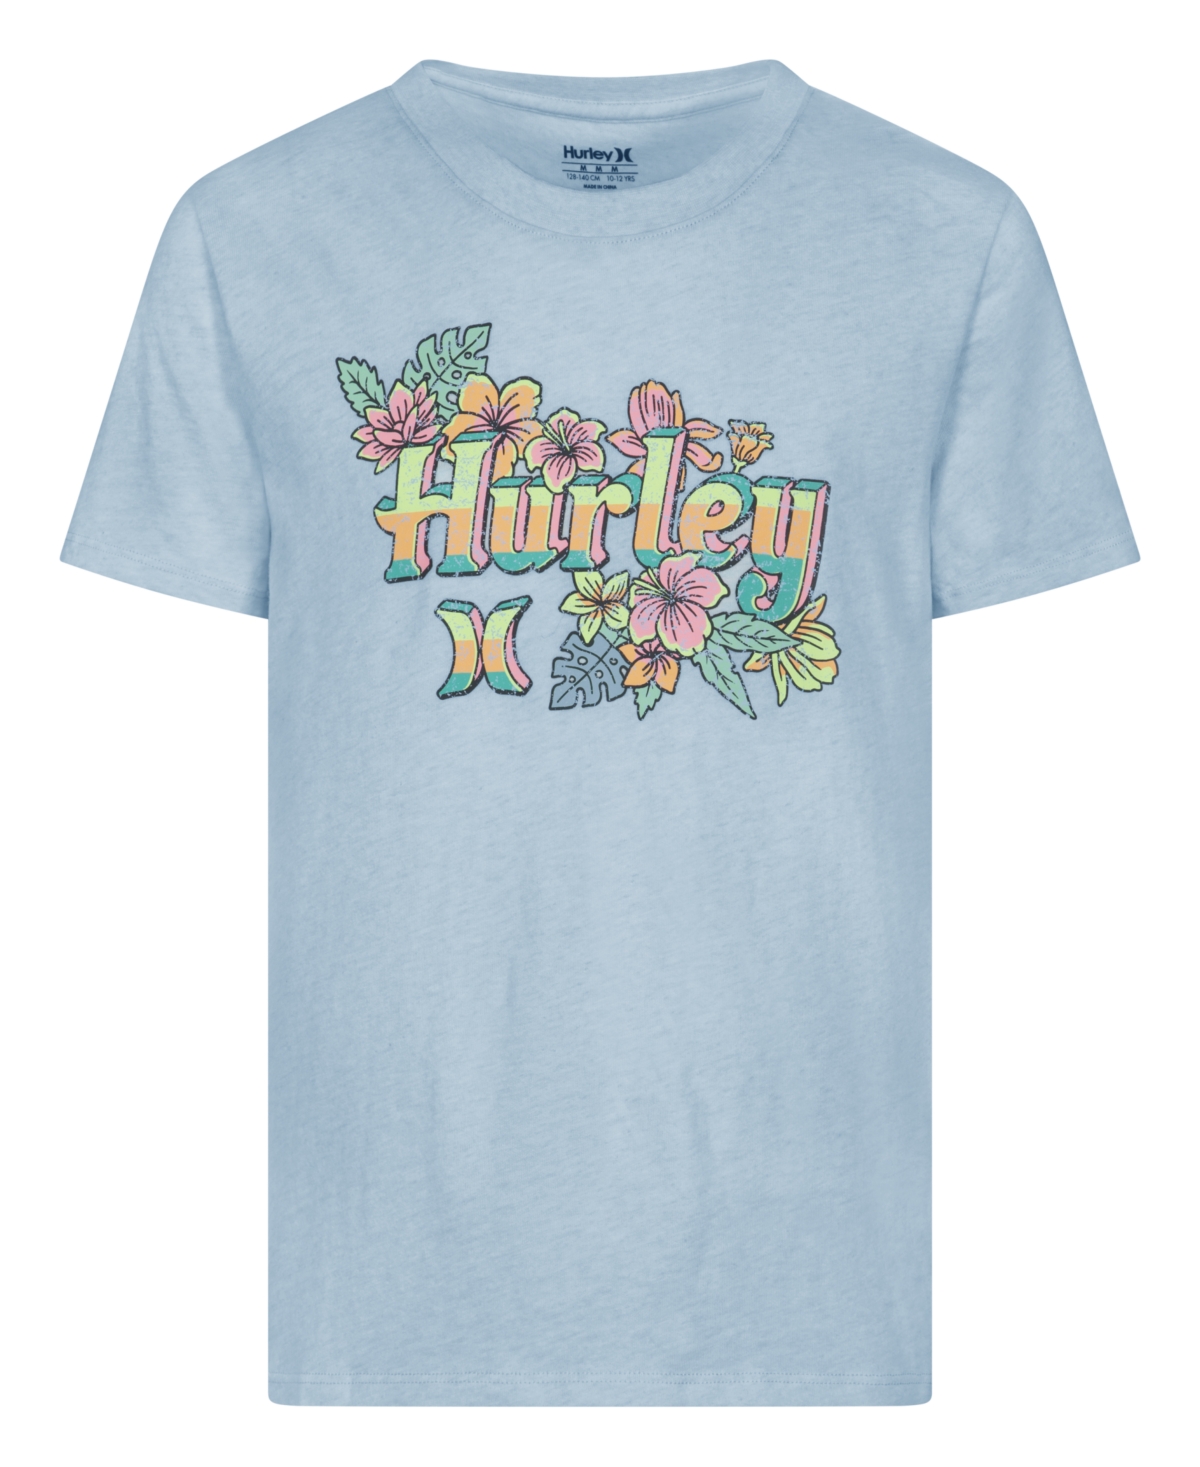 Hurley Kids' Big Girls Retro Floral T-shirts In Blue Ice Heather